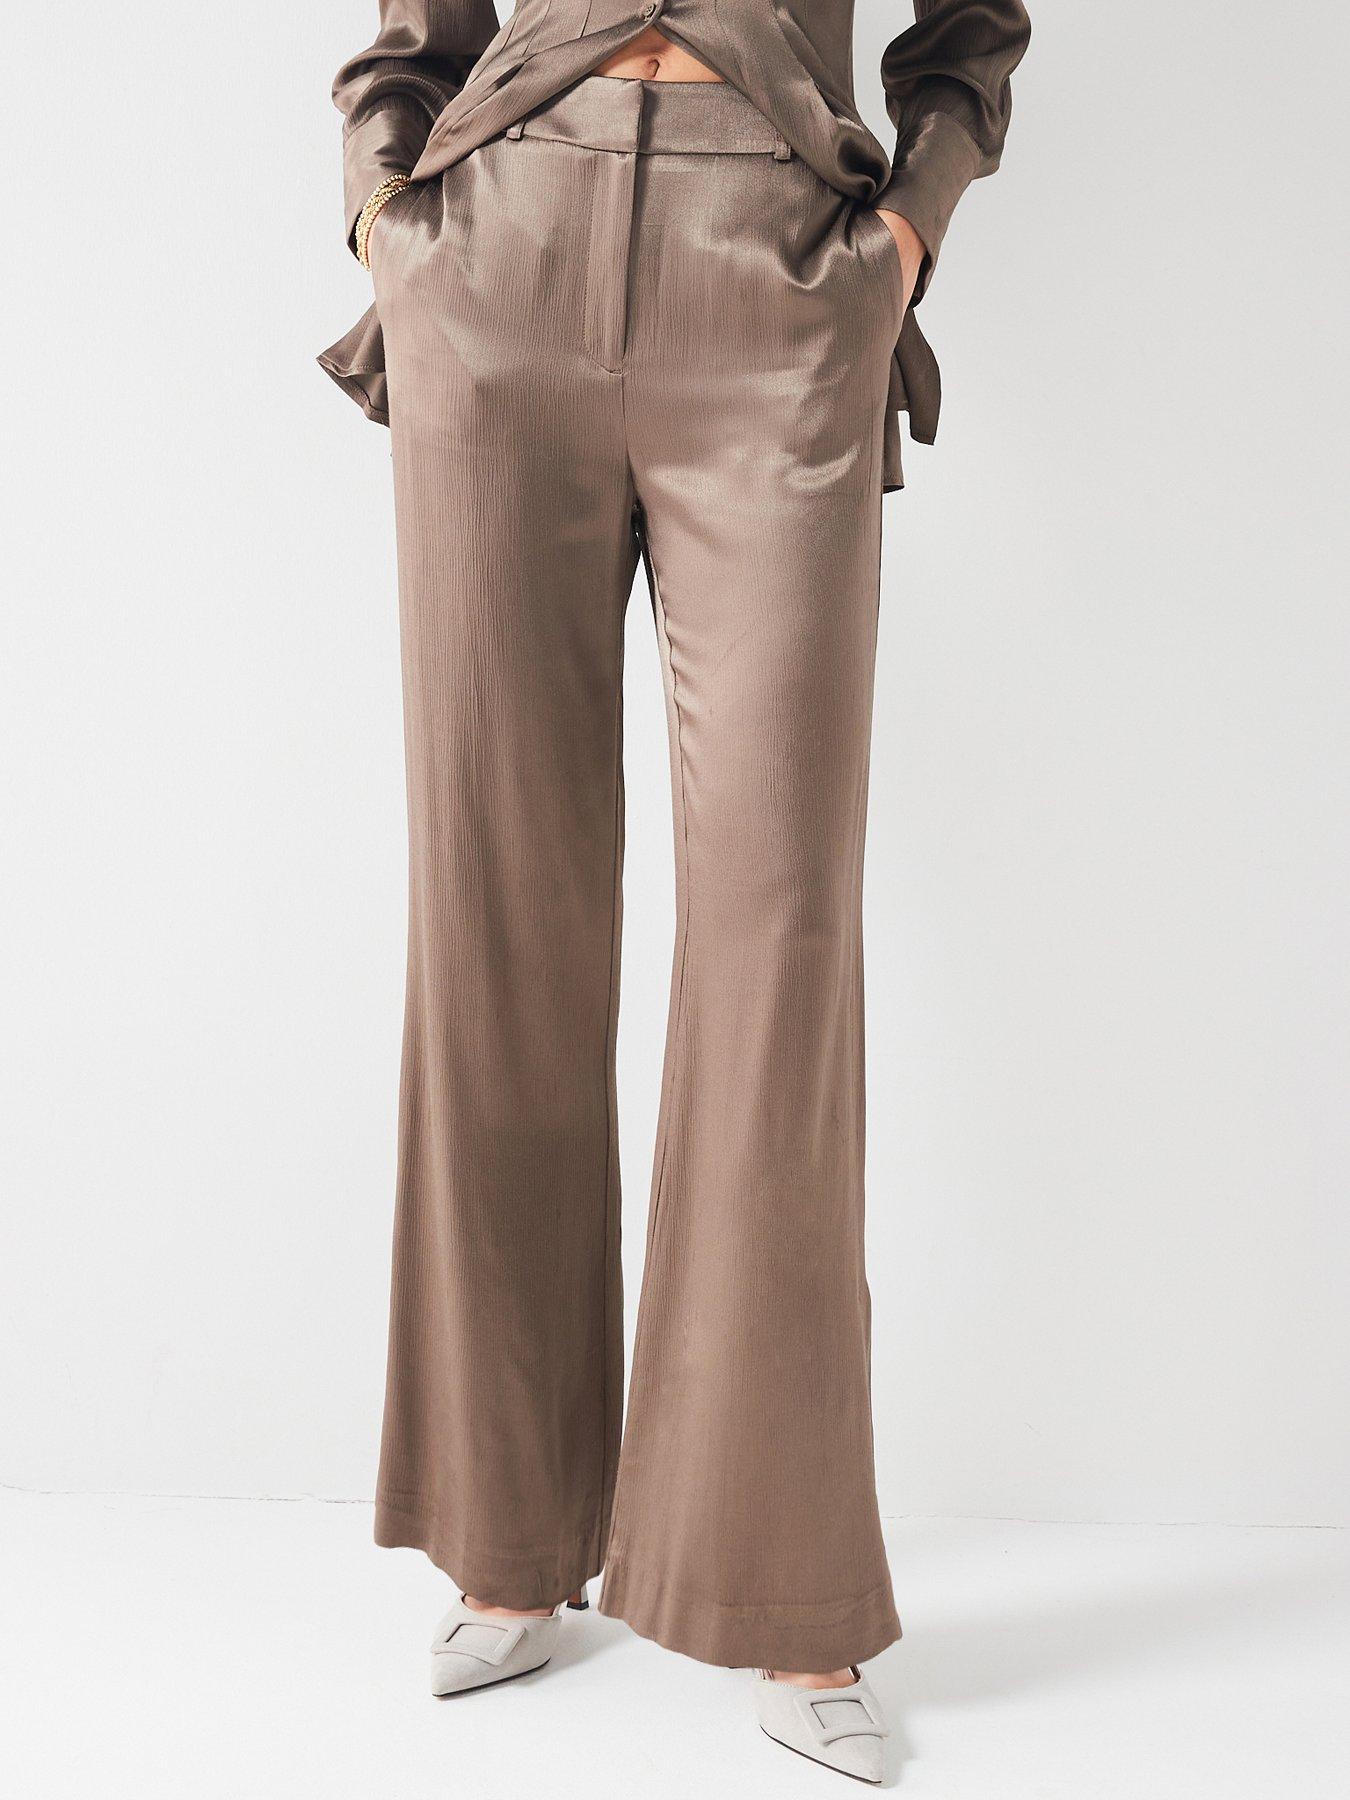 Only Petite oversized satin blazer and palazzo trouser co-ord in champagne